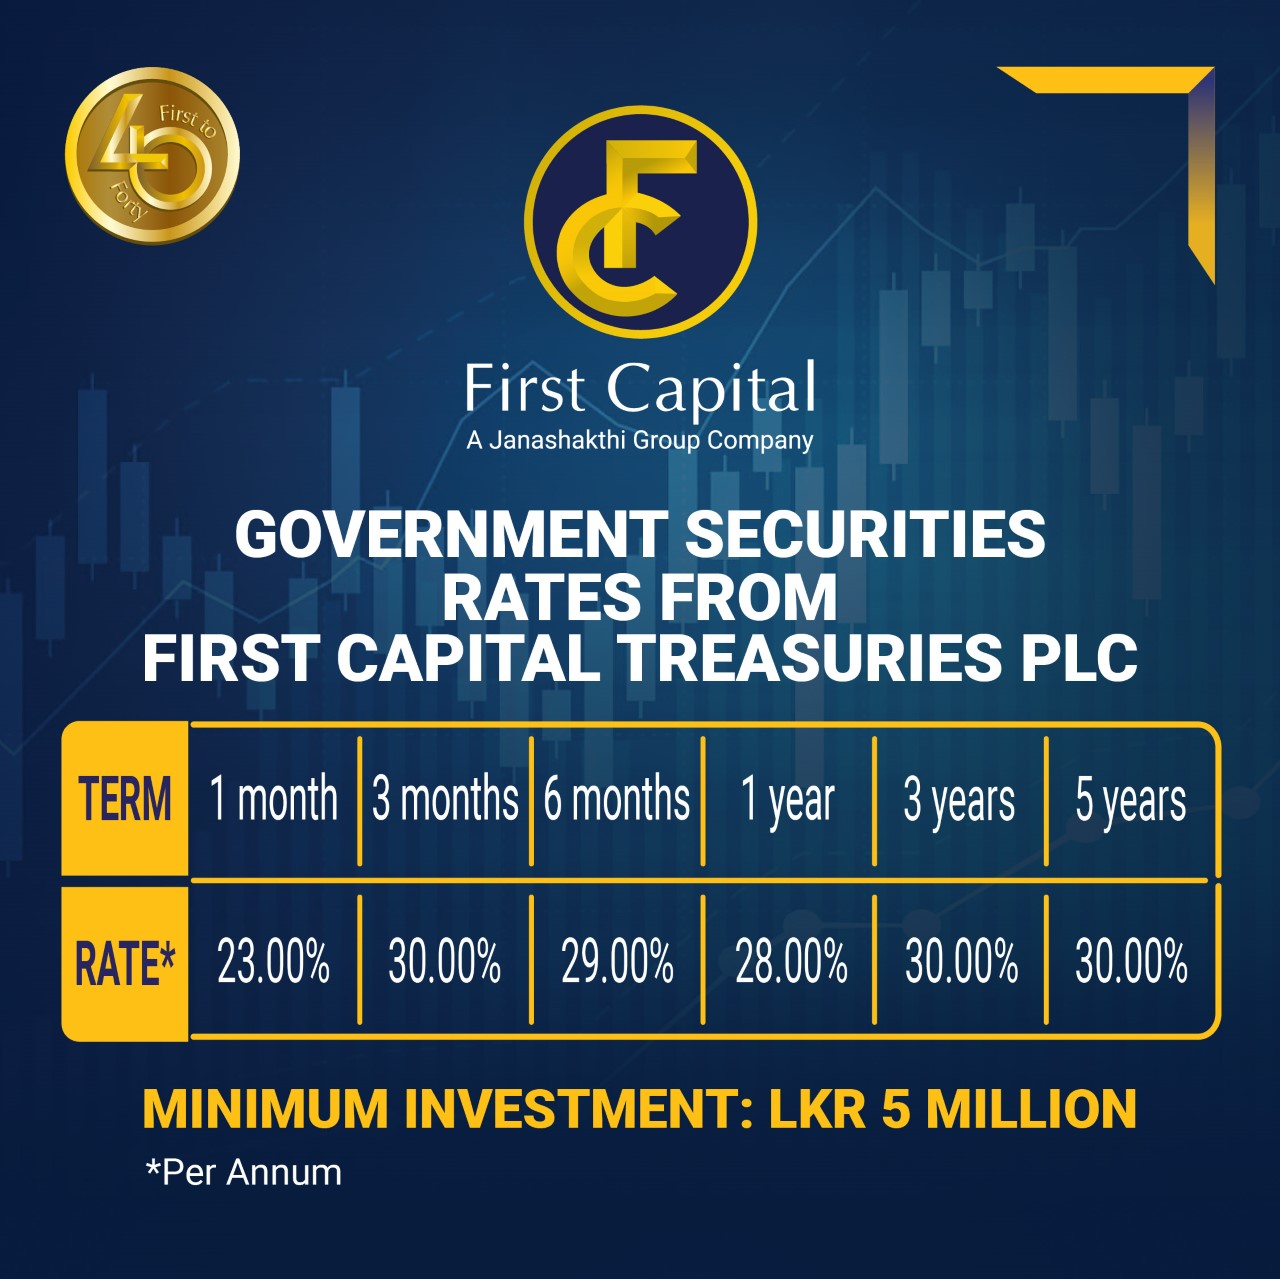 Invest in Government Securities with First Capital Treasuries PLC